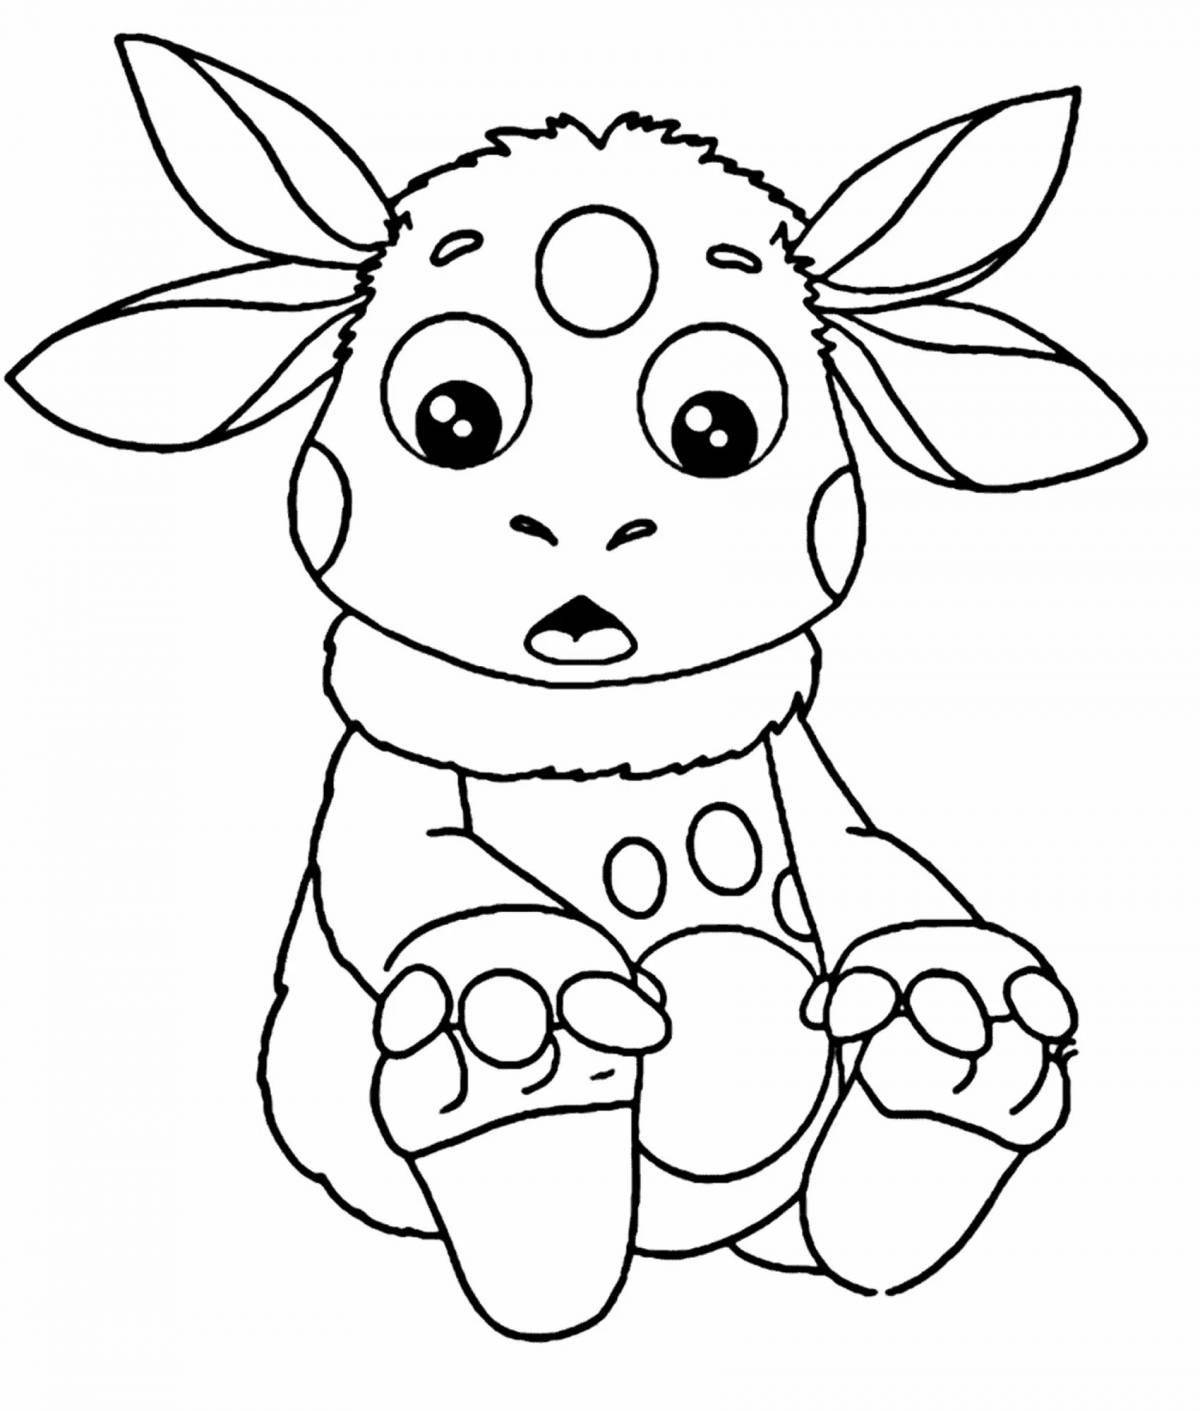 Luntik coloring pages for children 2-3 years old